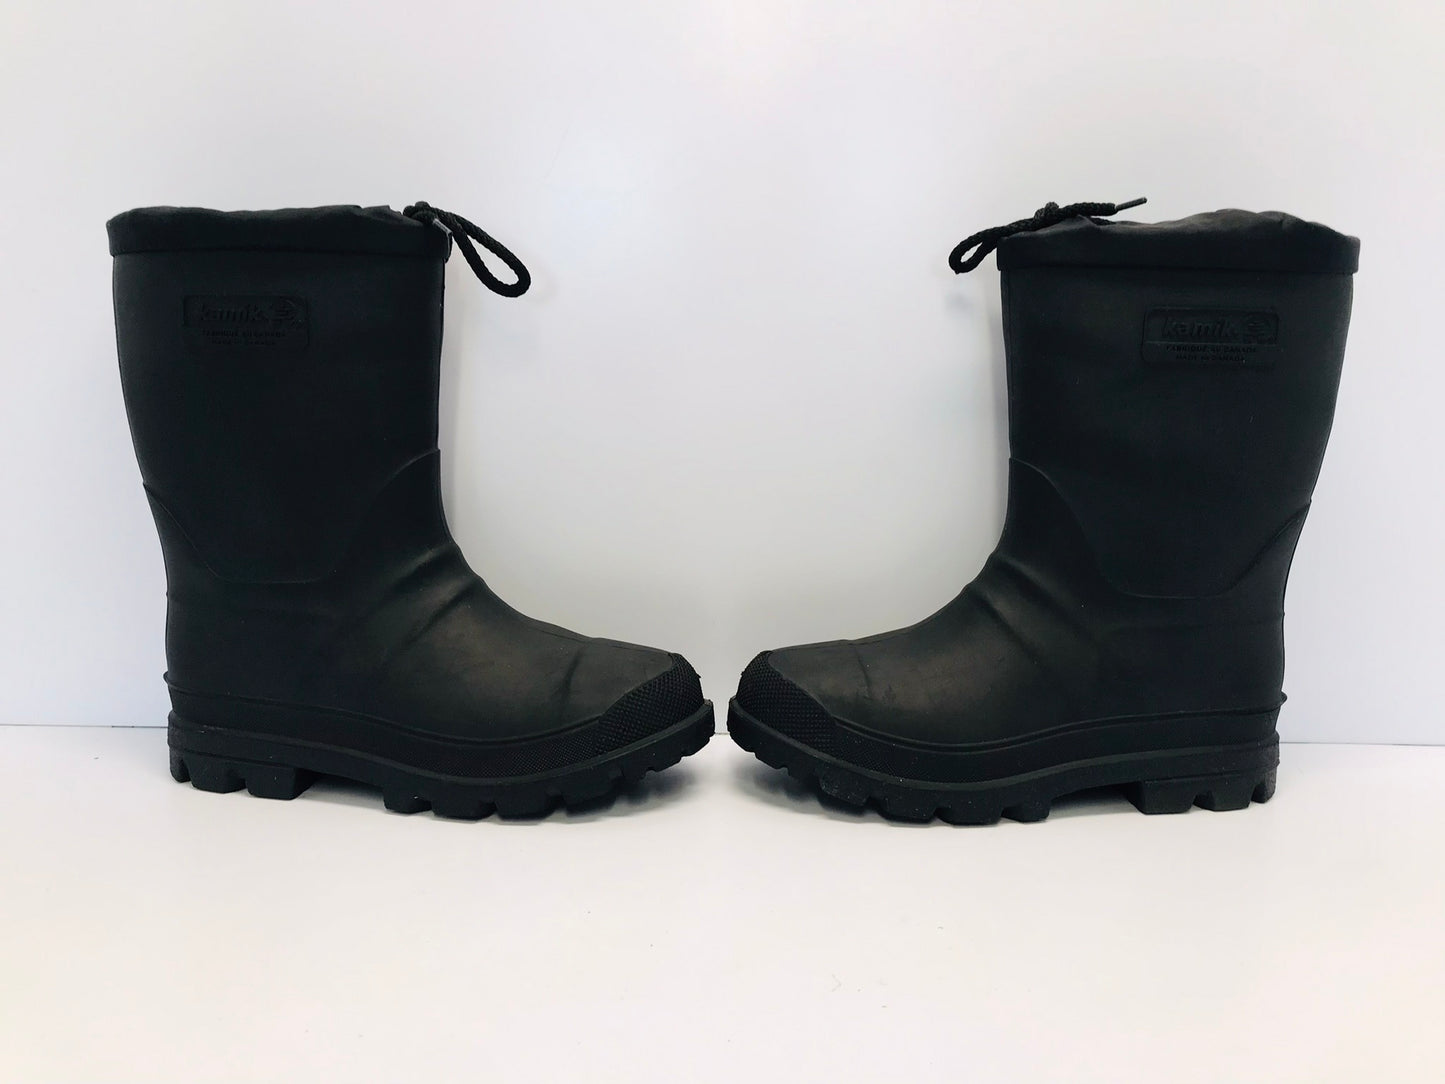 Rain Boots Men's Size 6 Kamik With Liner For Snow Black New Demo Model